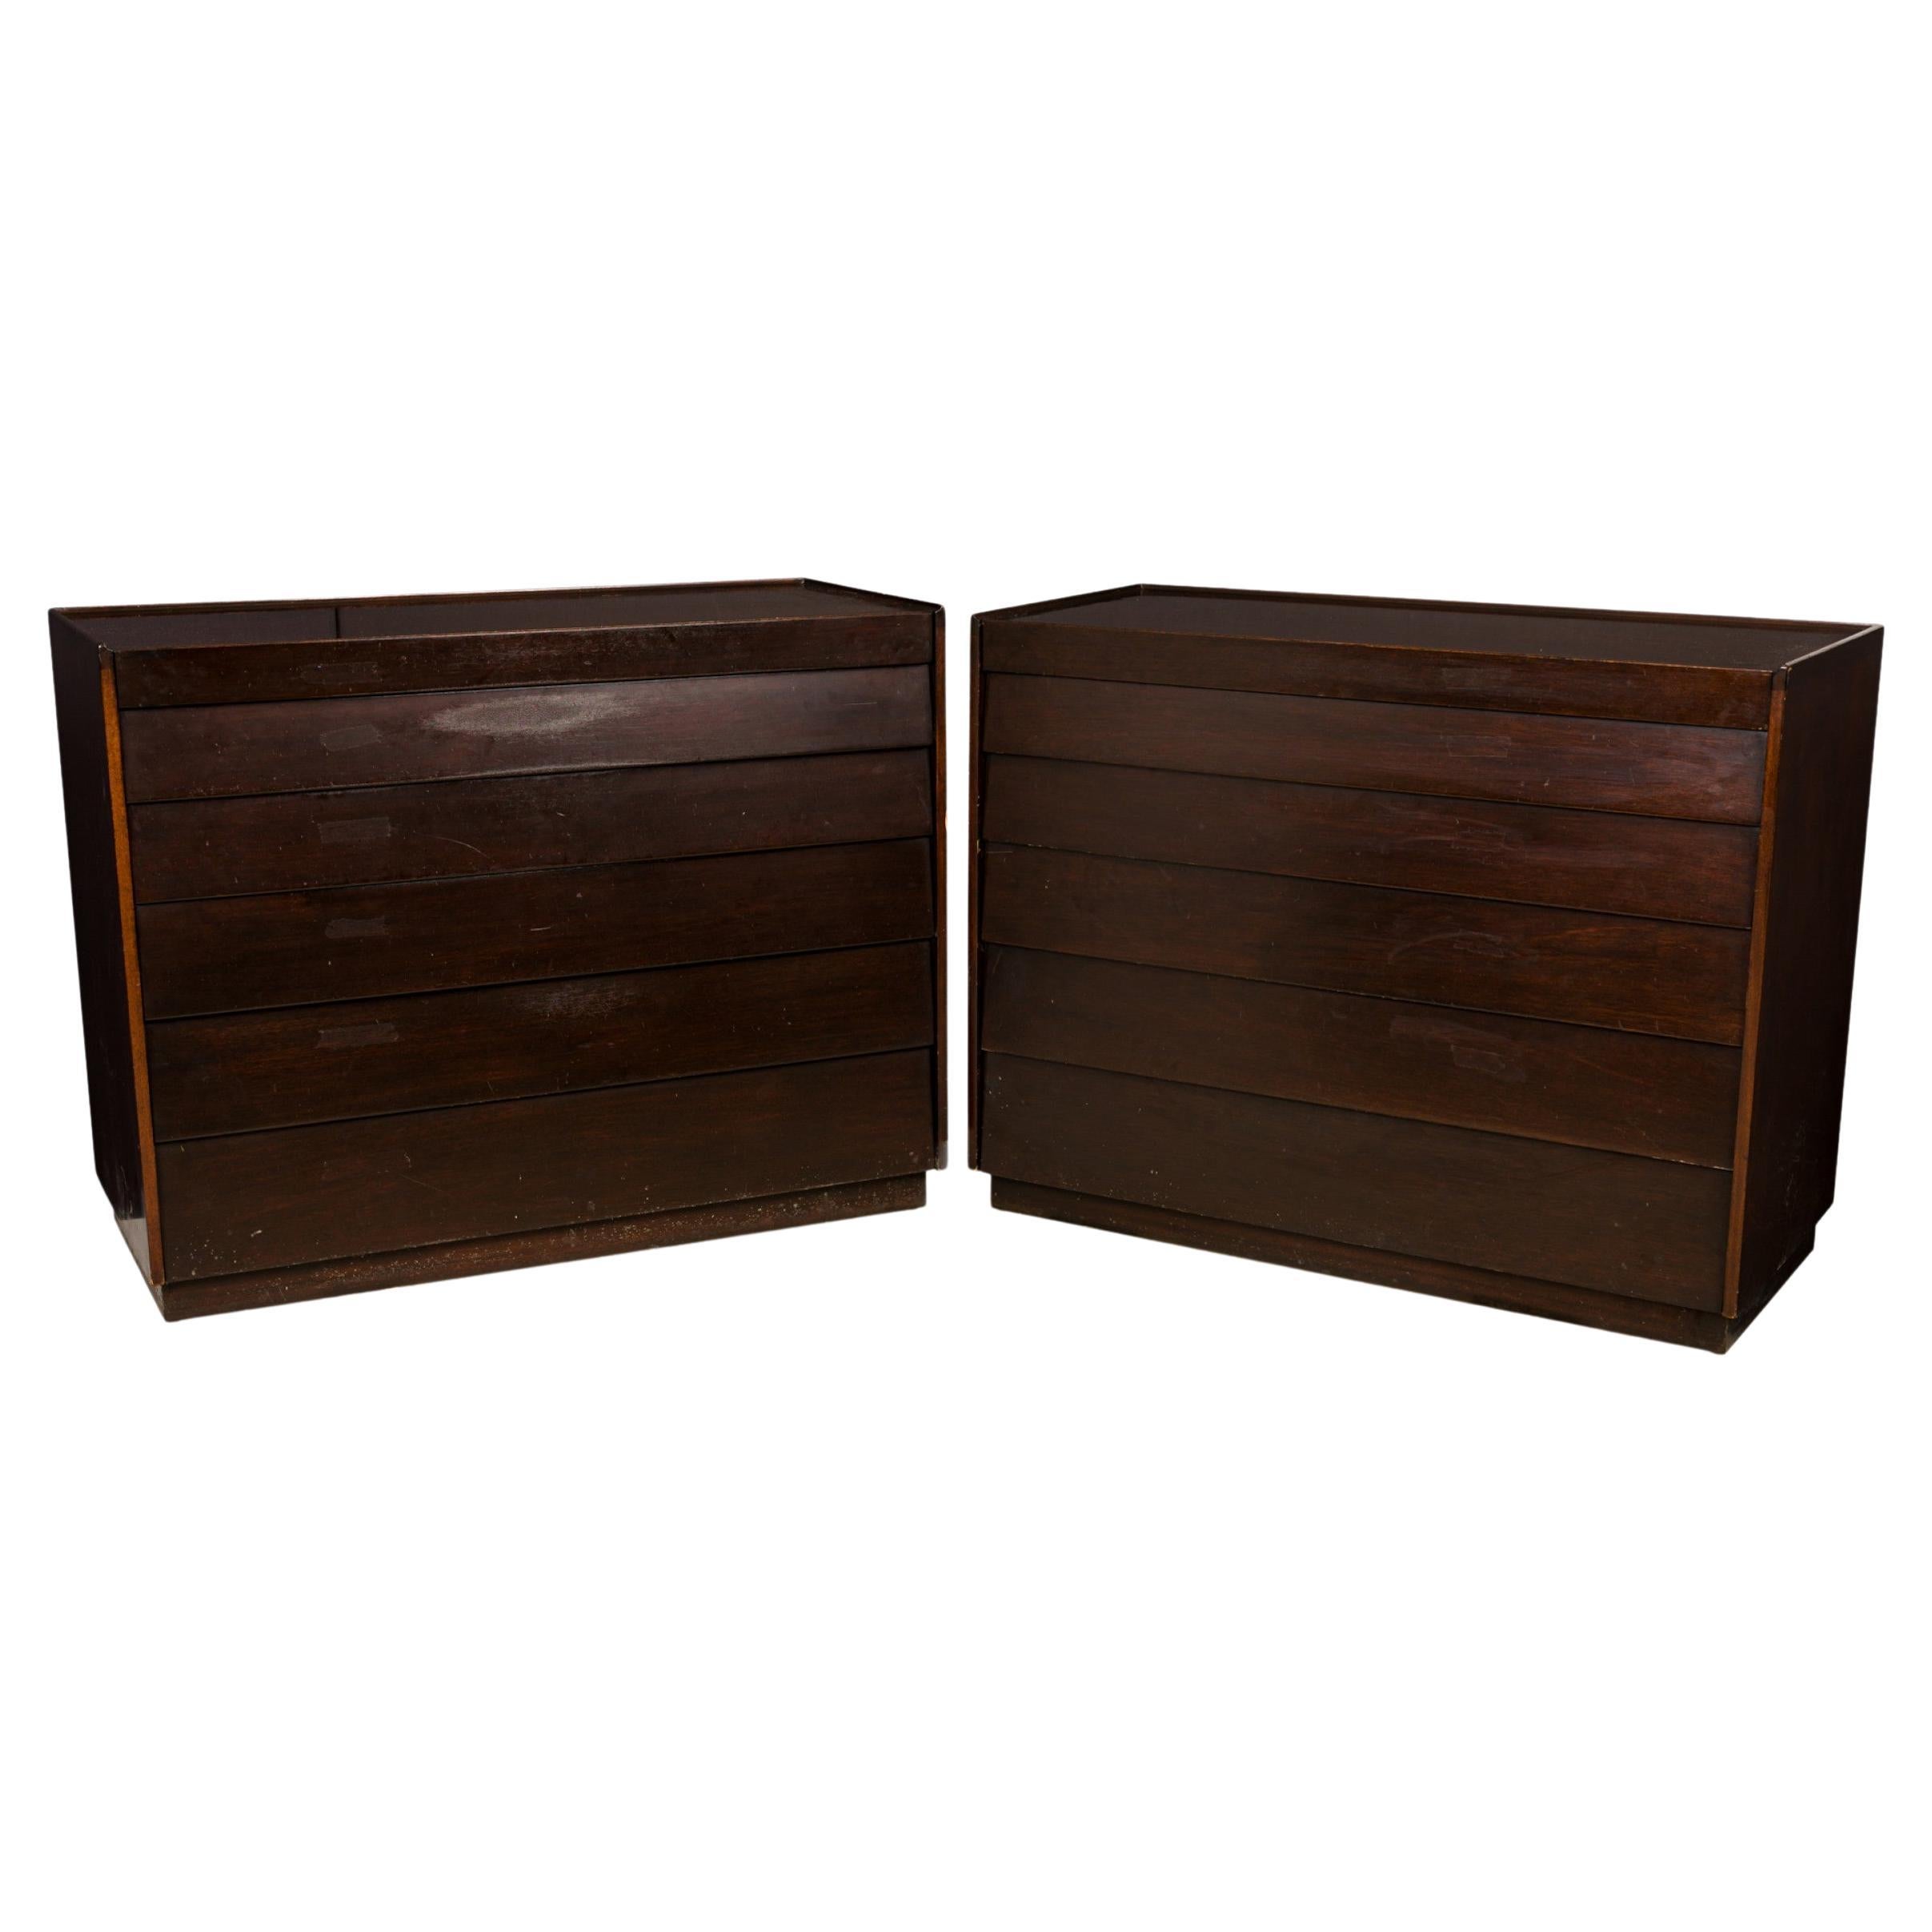 Pair of Edward Wormley for Dunbar Dark Wood Louver Front Commodes / Chests